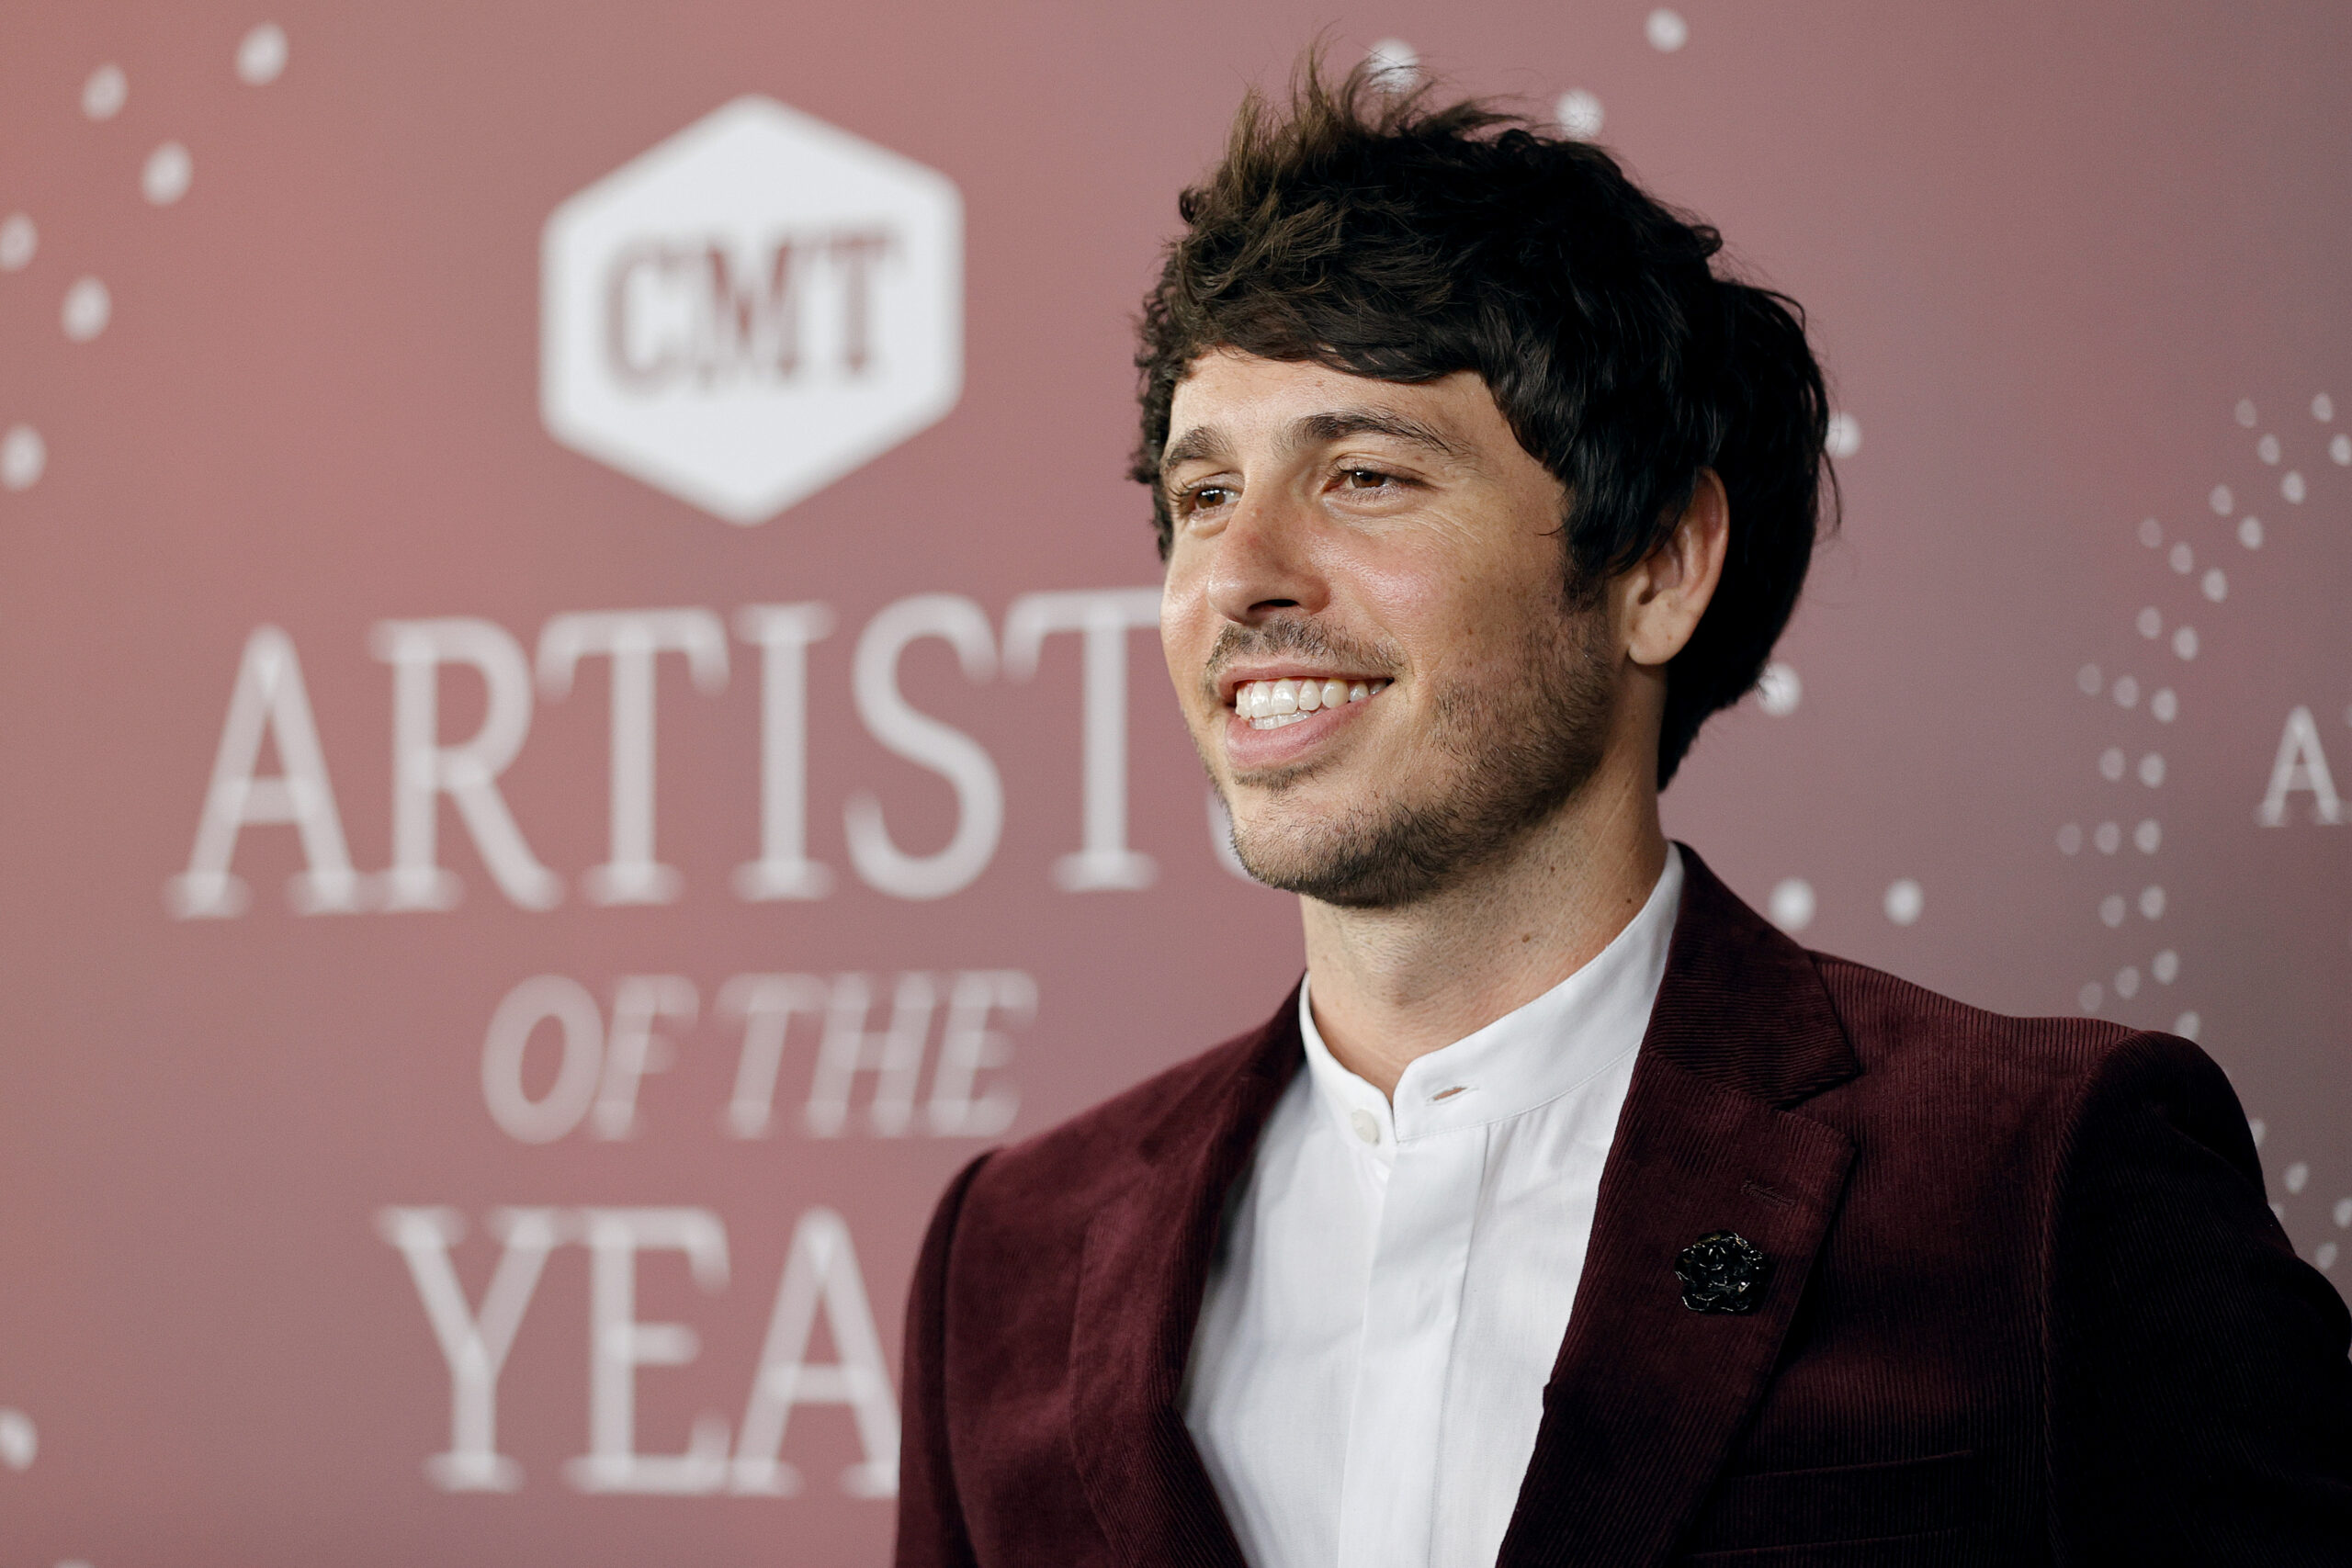 Morgan Evans Supports Wife Kelsea Ballerini at the 2021 CMT Artists of The Year Ceremony (Exclusive)